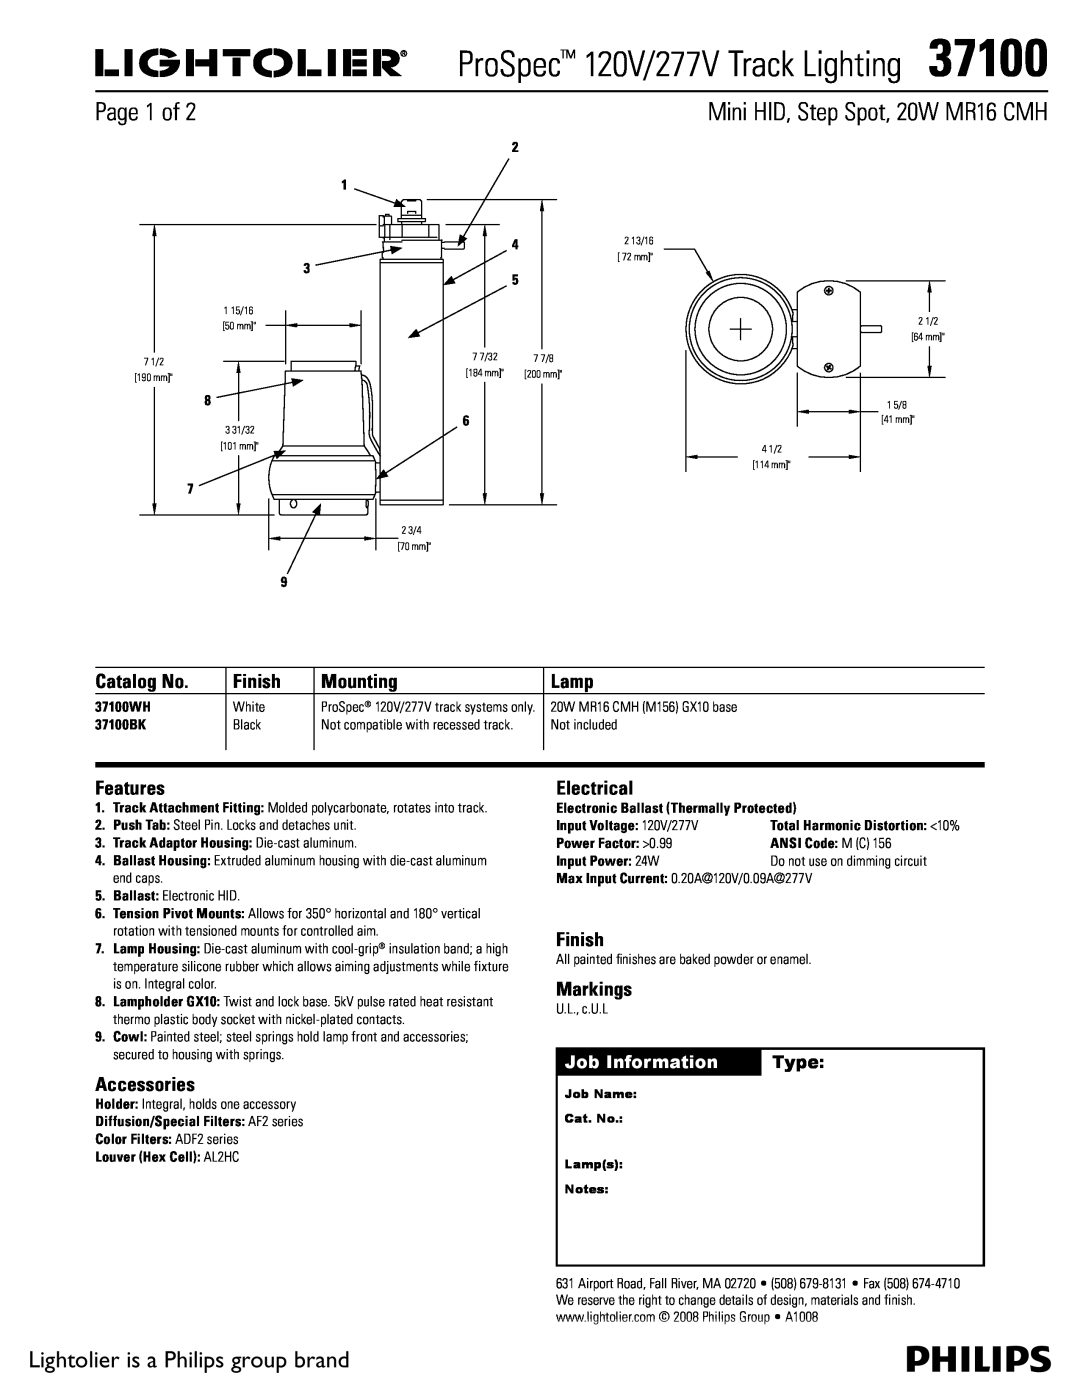 Lightolier 37100 manual Page 1 of, Lightolier is a Philips group brand, Catalog No, Finish, Mounting, Lamp, Features, Type 